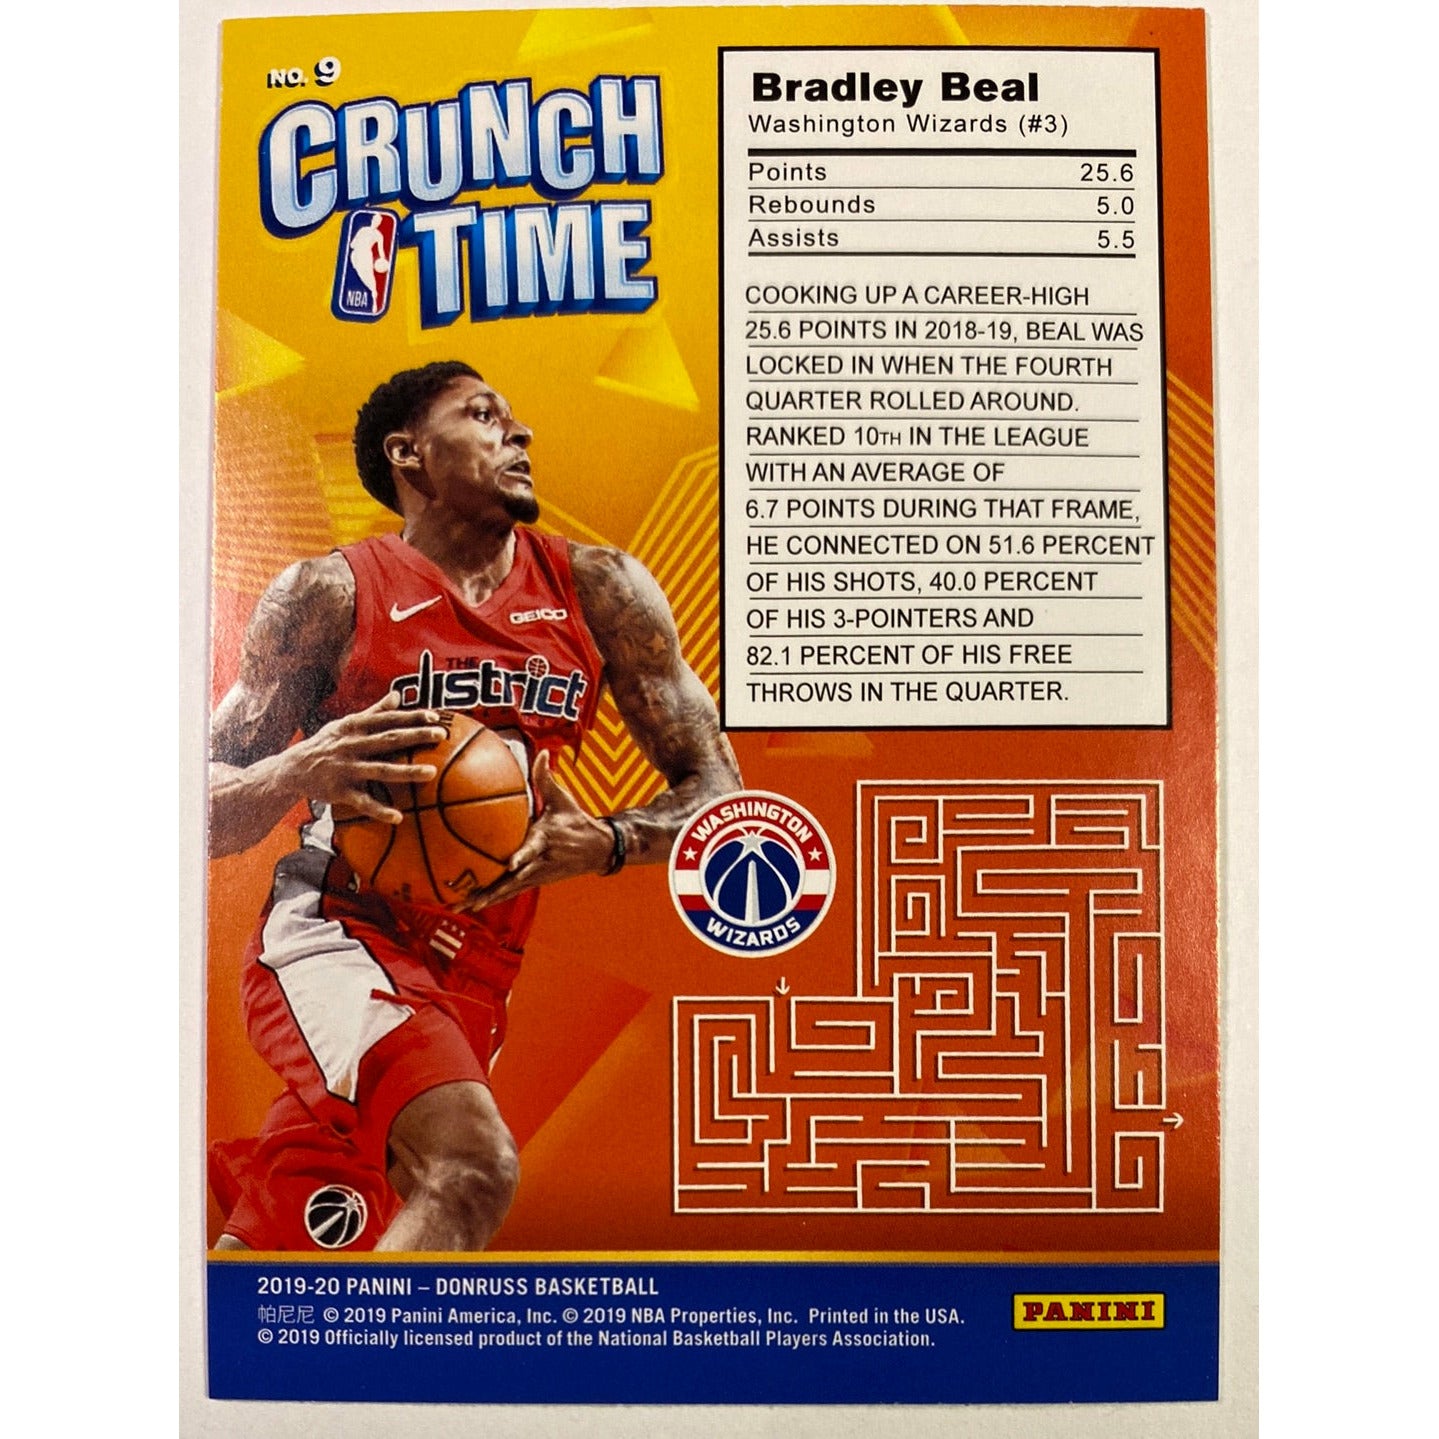  2019-20 Donruss Bradley Beal Crunch Time  Local Legends Cards & Collectibles